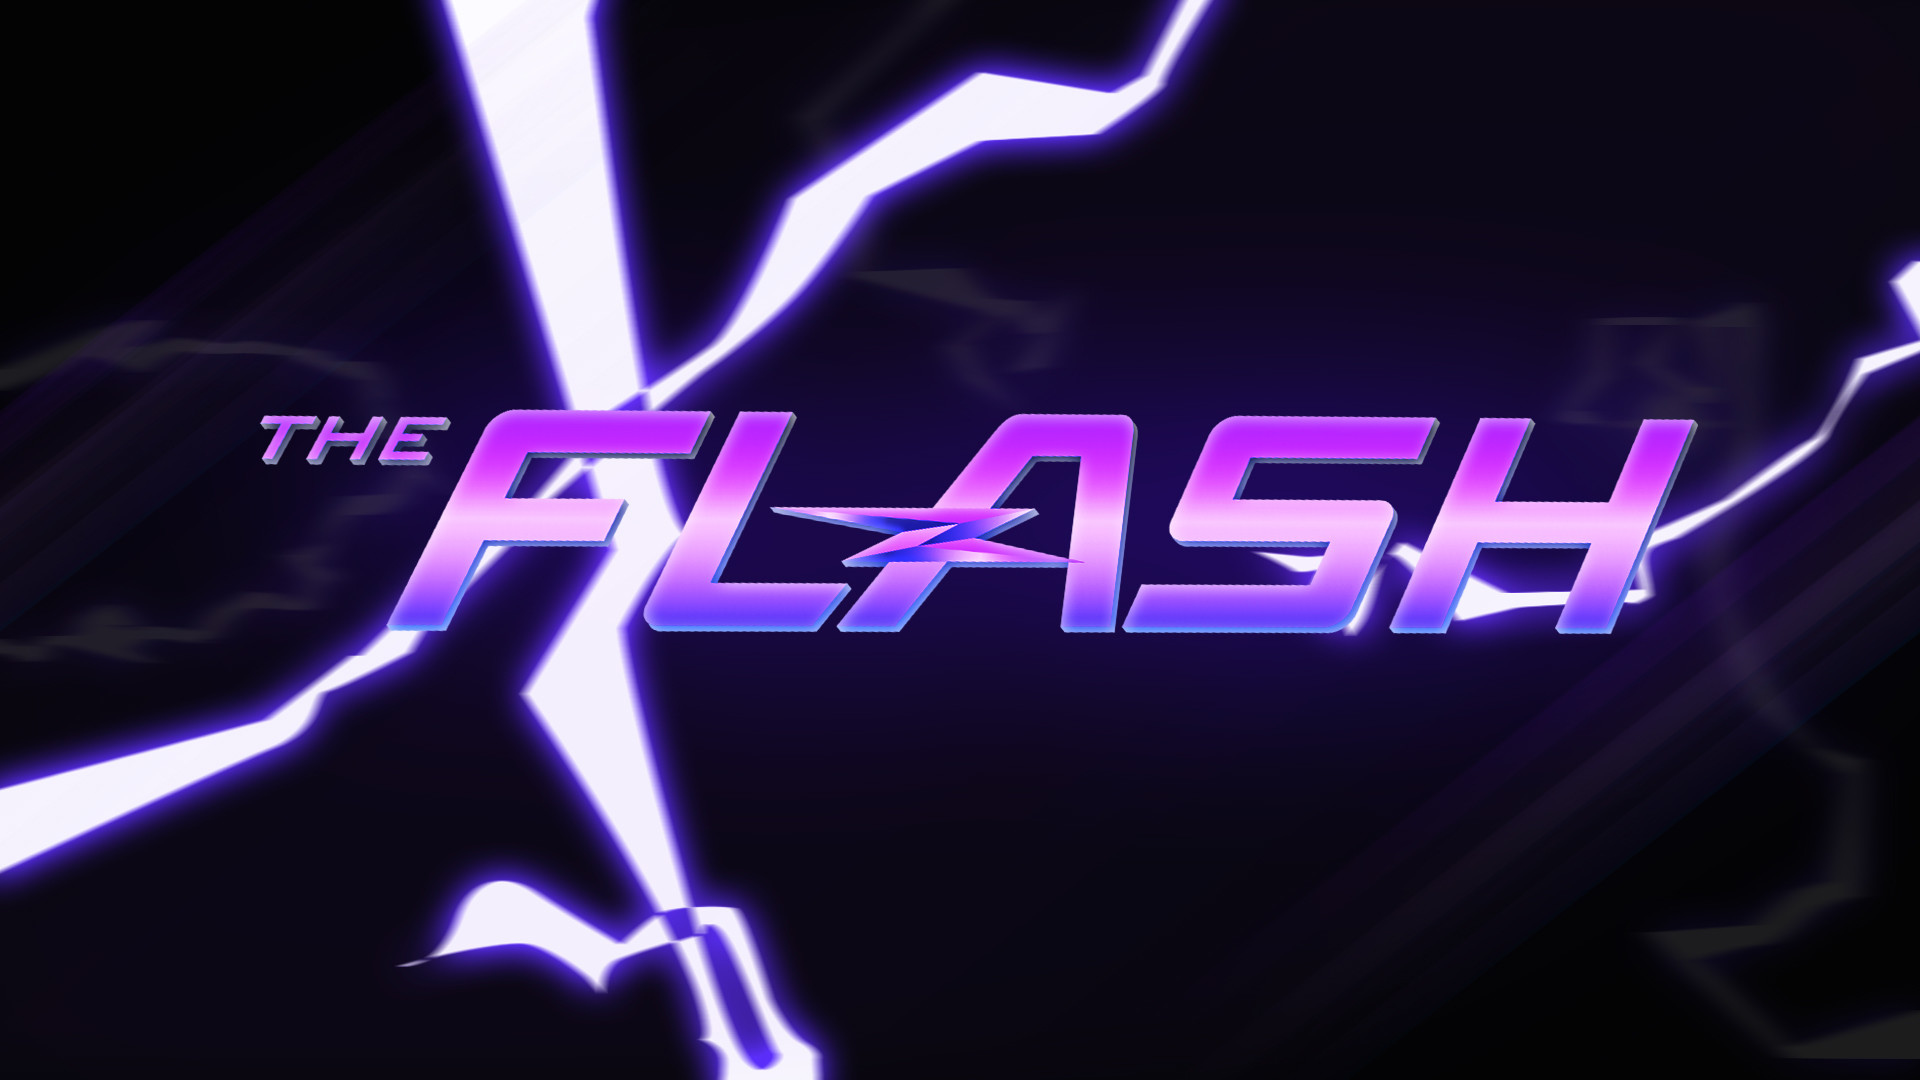 1920x1080 CW's The Flash Logo Desktop Wallpaper - Blue (from the show intro)